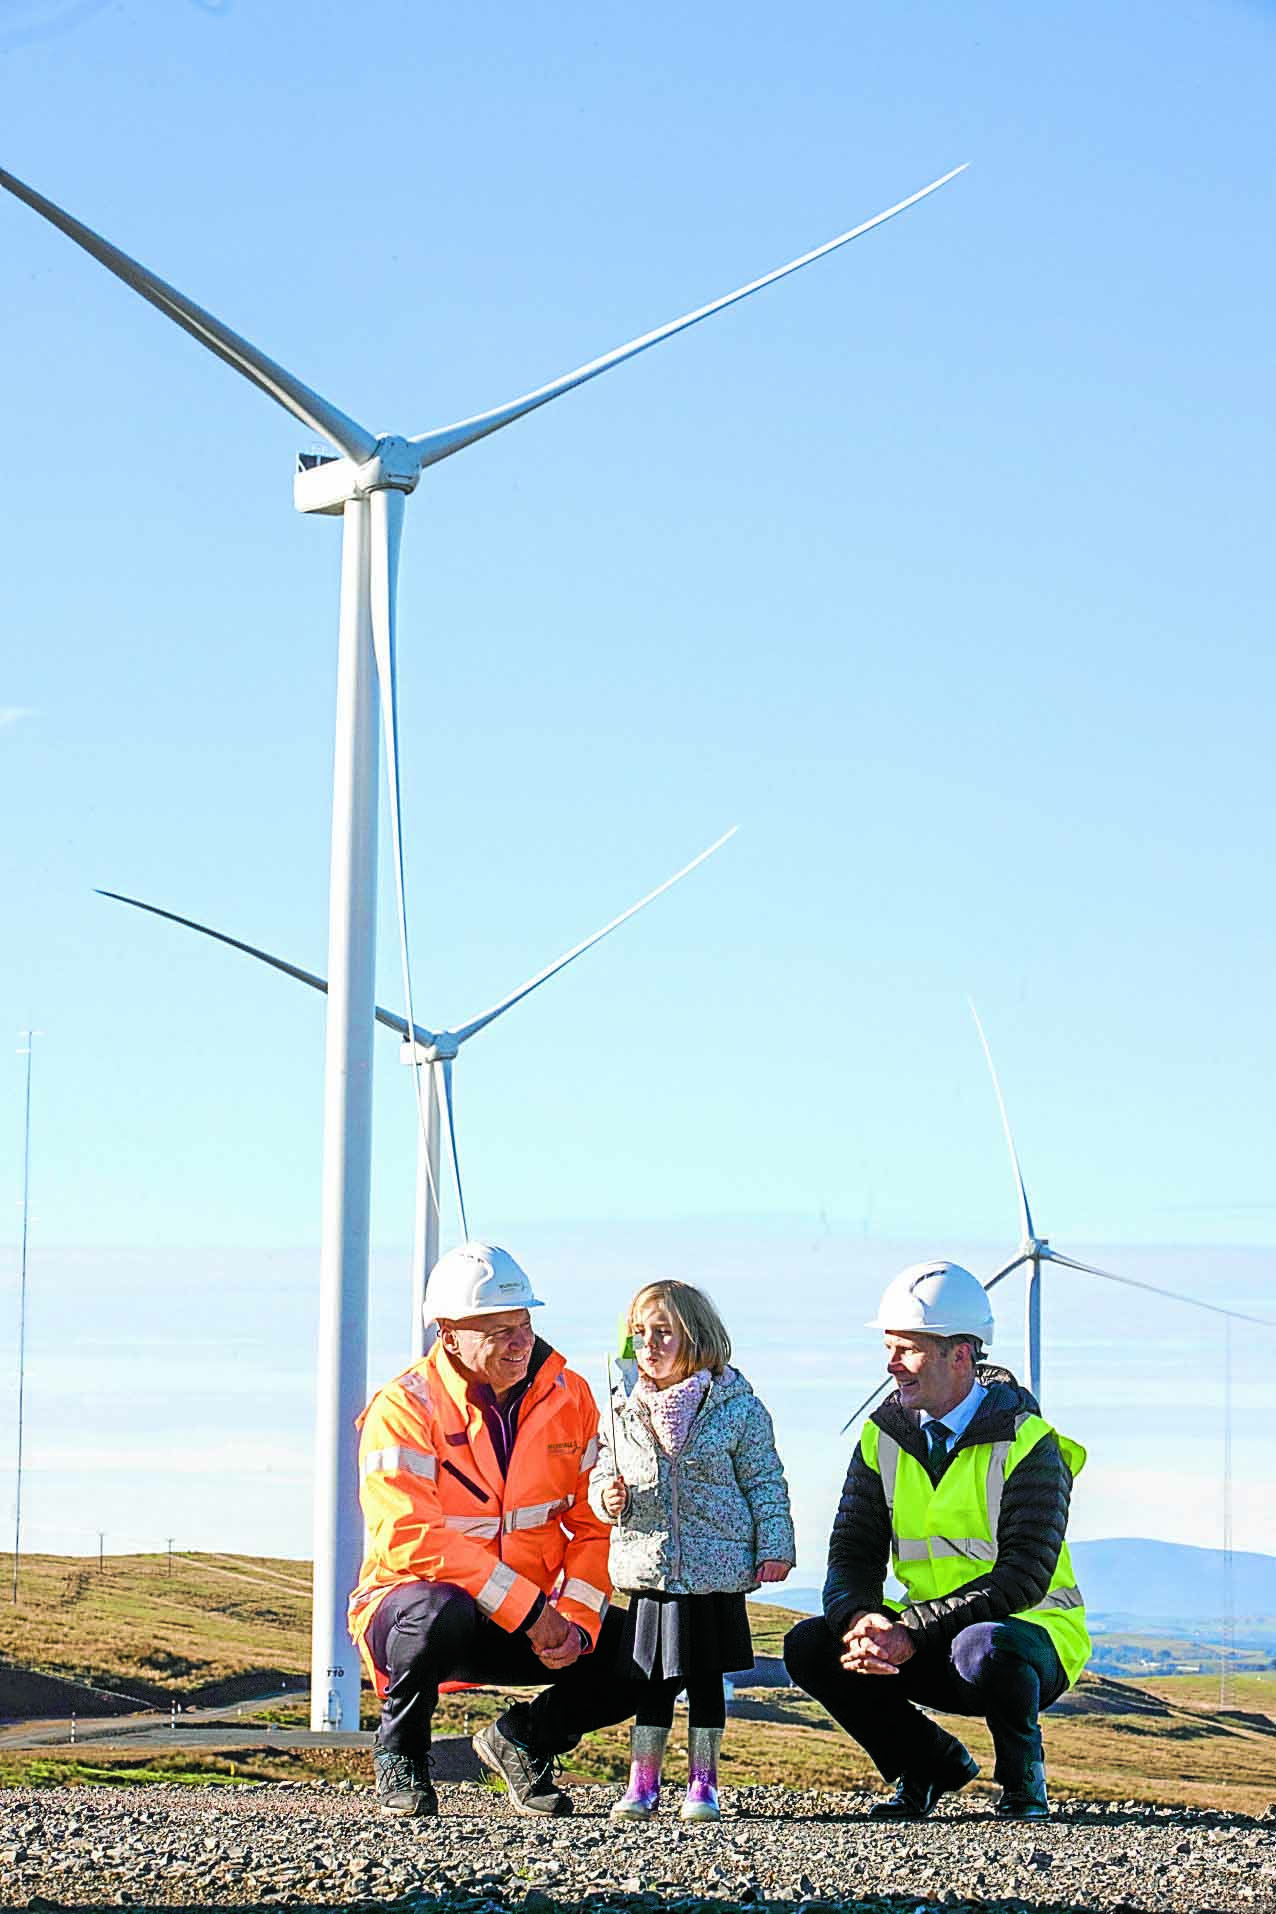 Minister opens windfarm